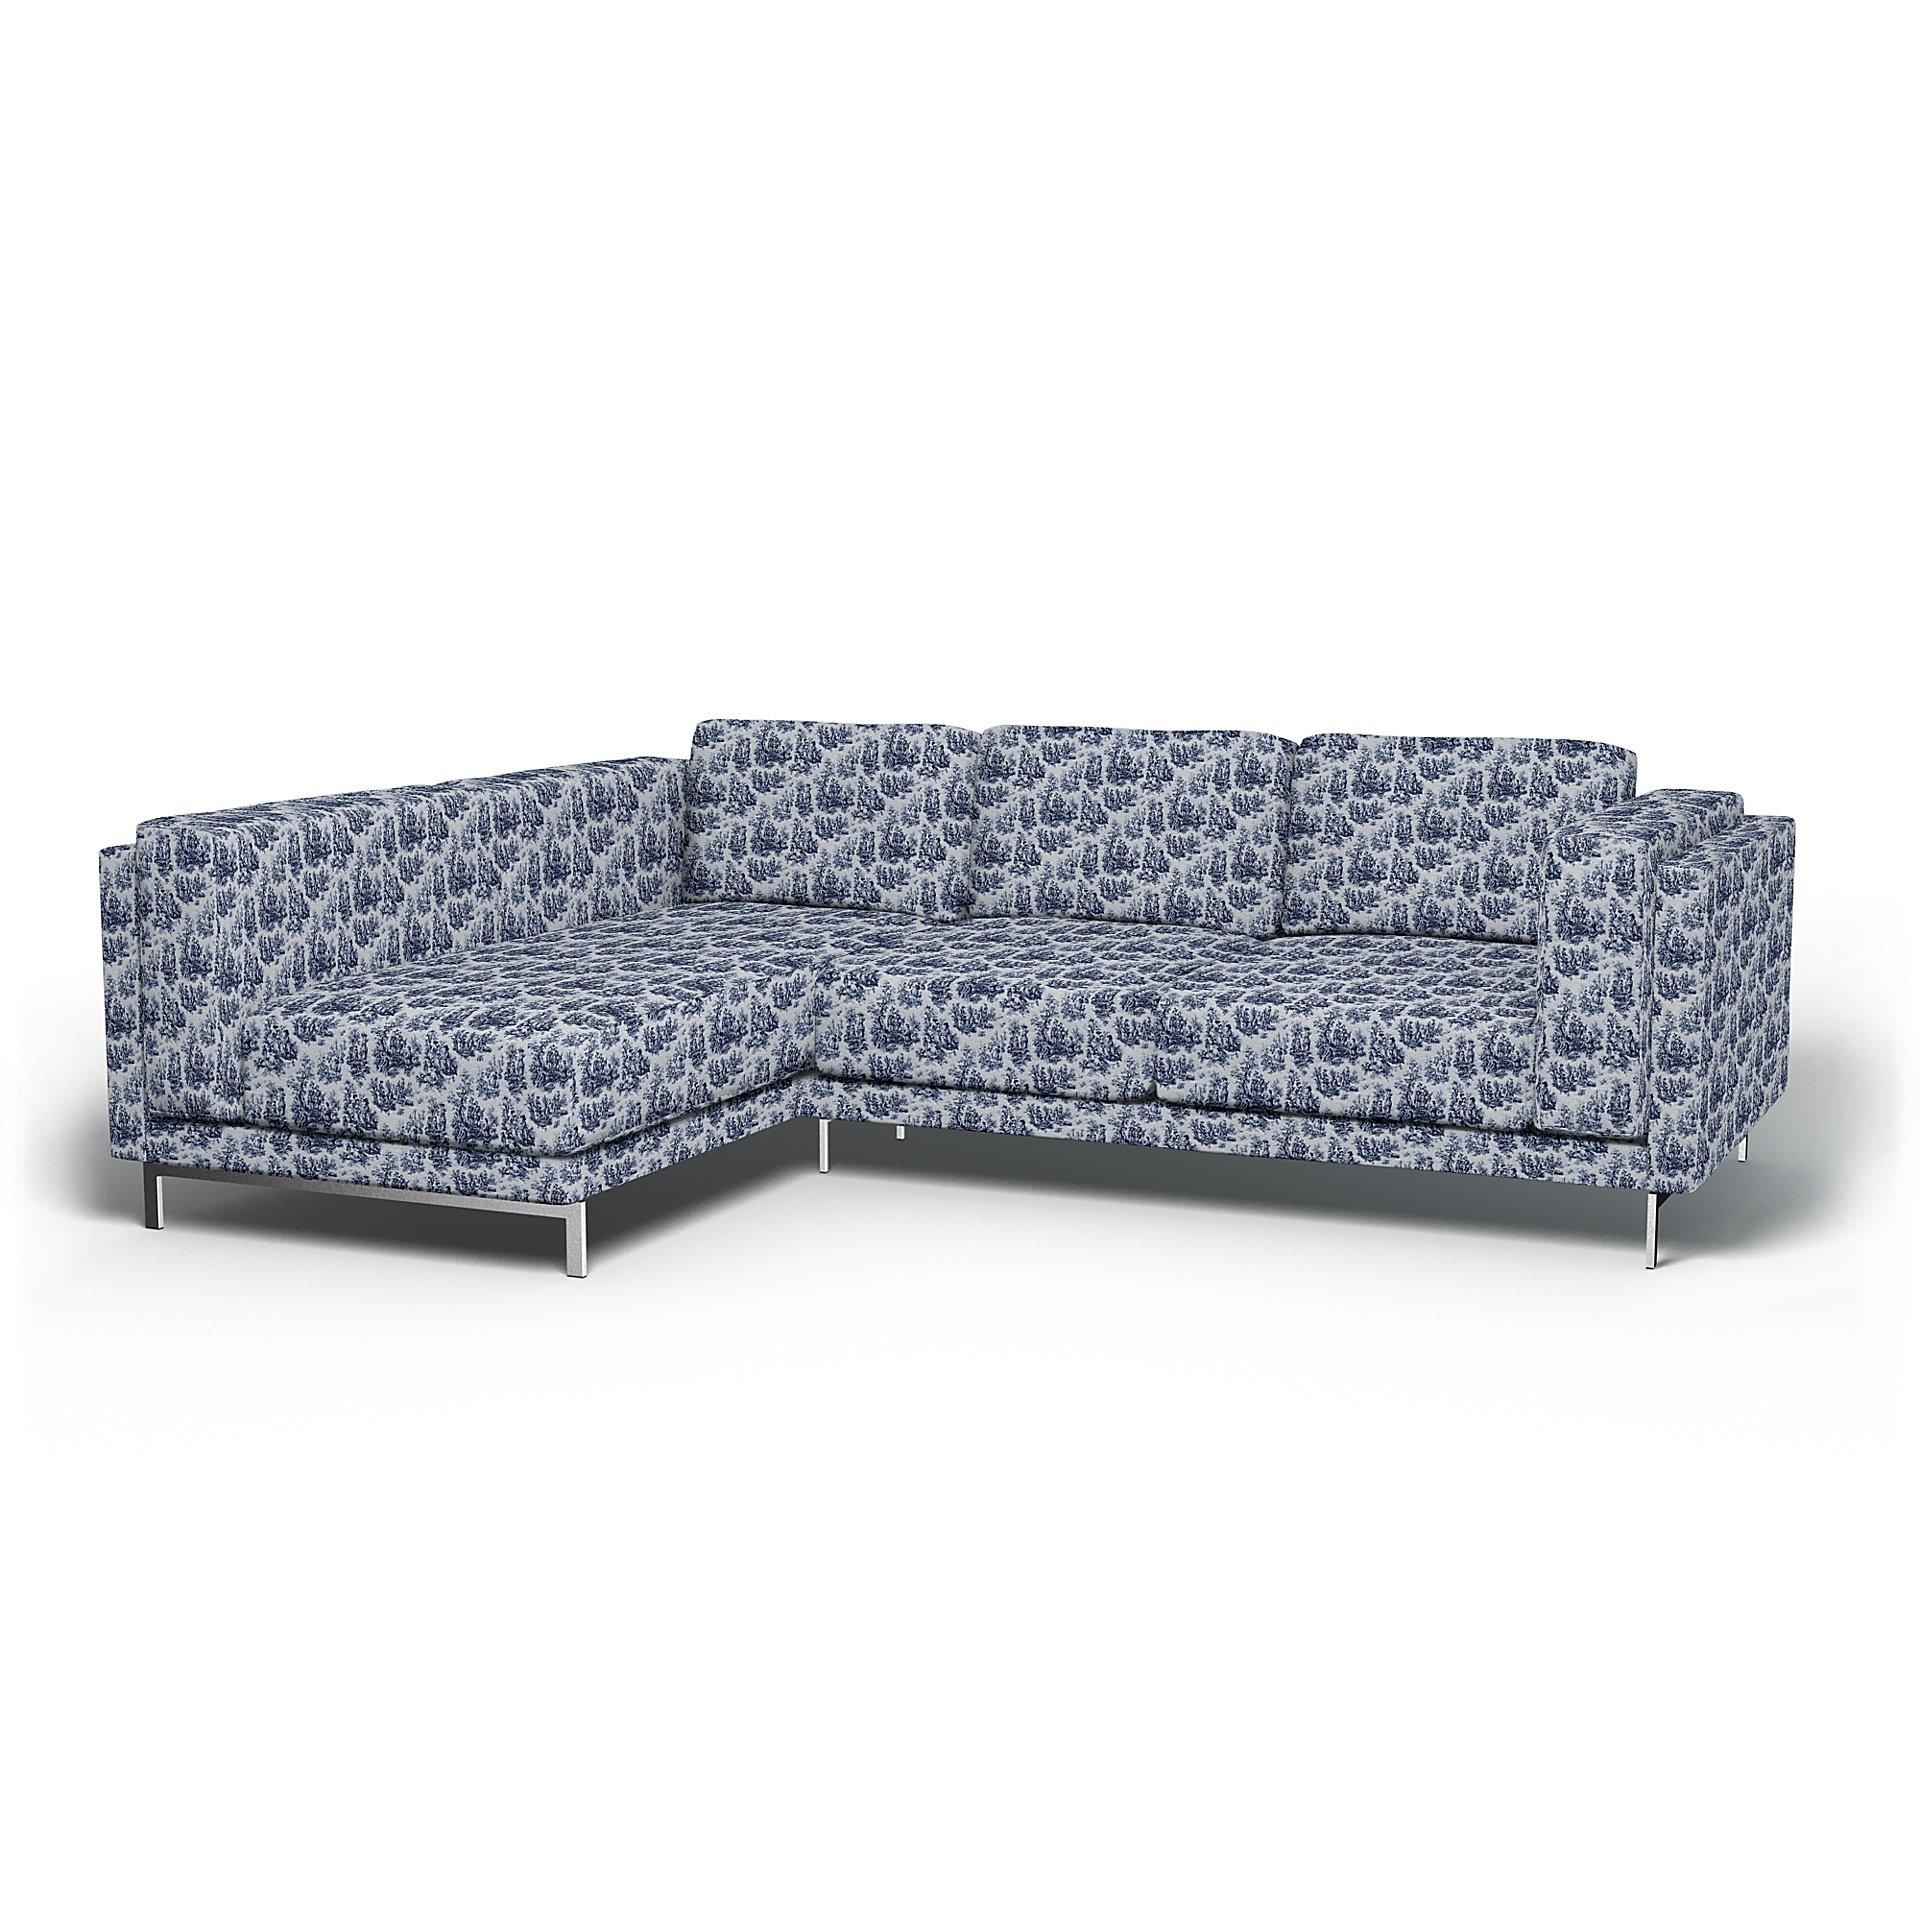 IKEA - Nockeby 3 Seater Sofa with Left Chaise Cover, Dark Blue, Boucle & Texture - Bemz